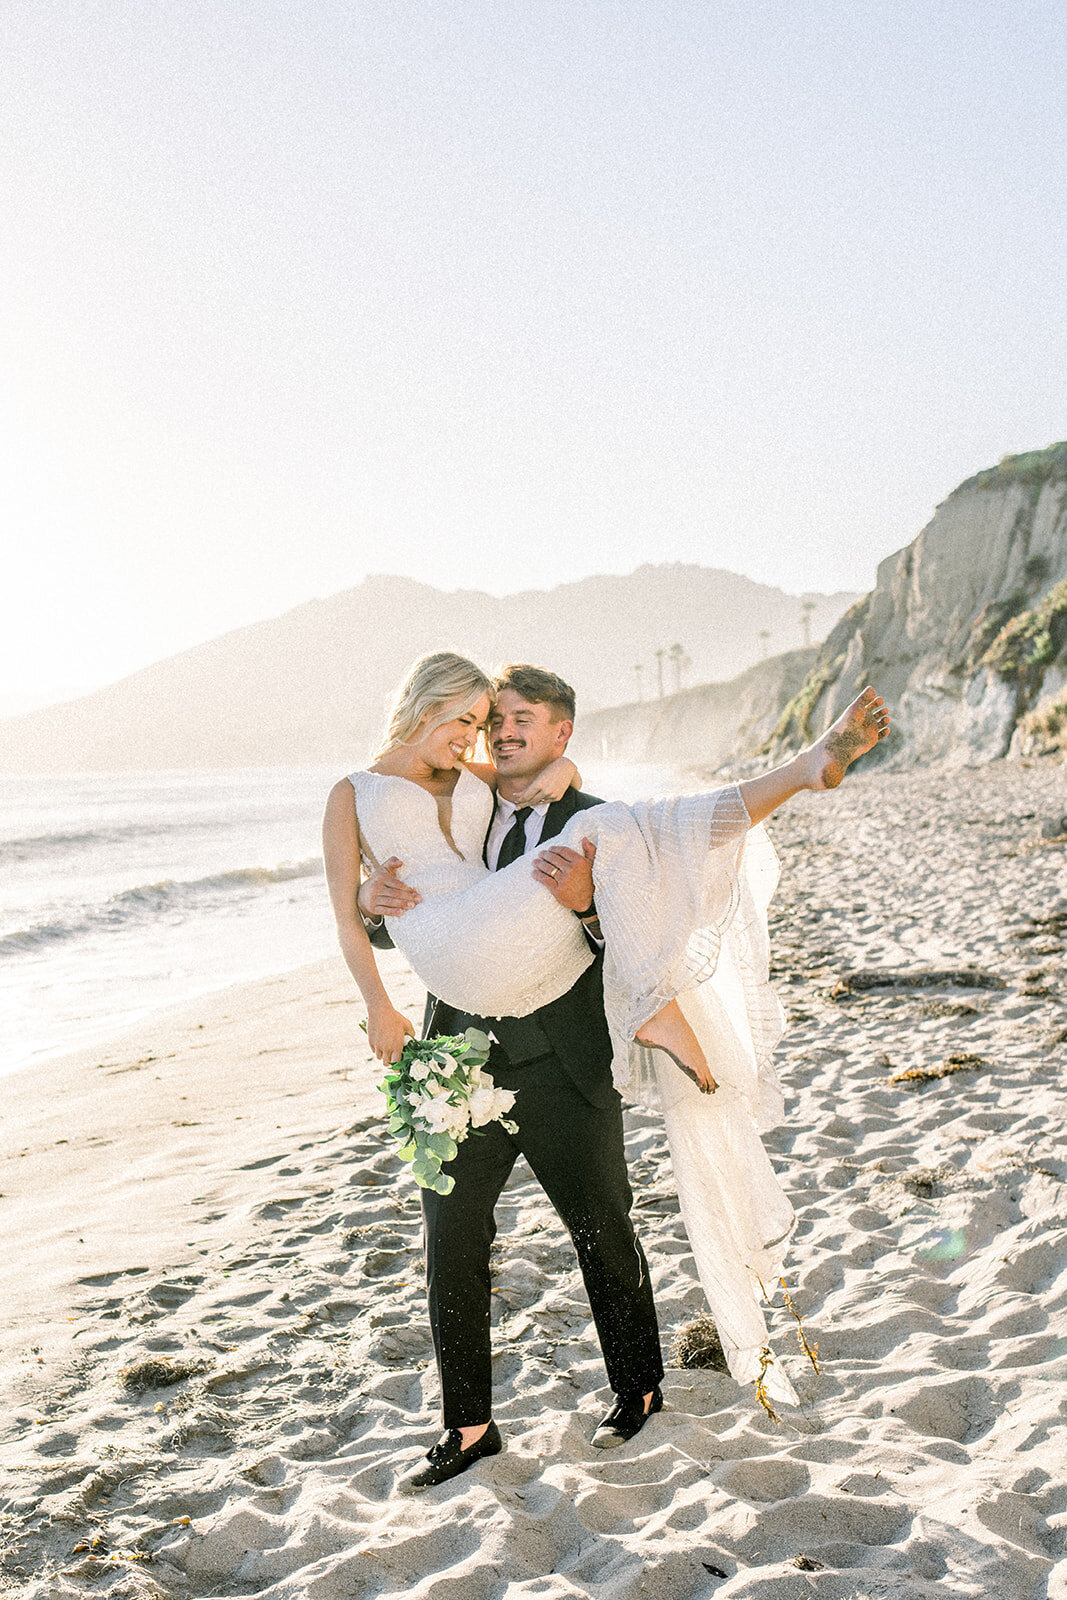 Groom carrying bride down the beach at Dolphin Bay Resort in Pismo Beach, CA